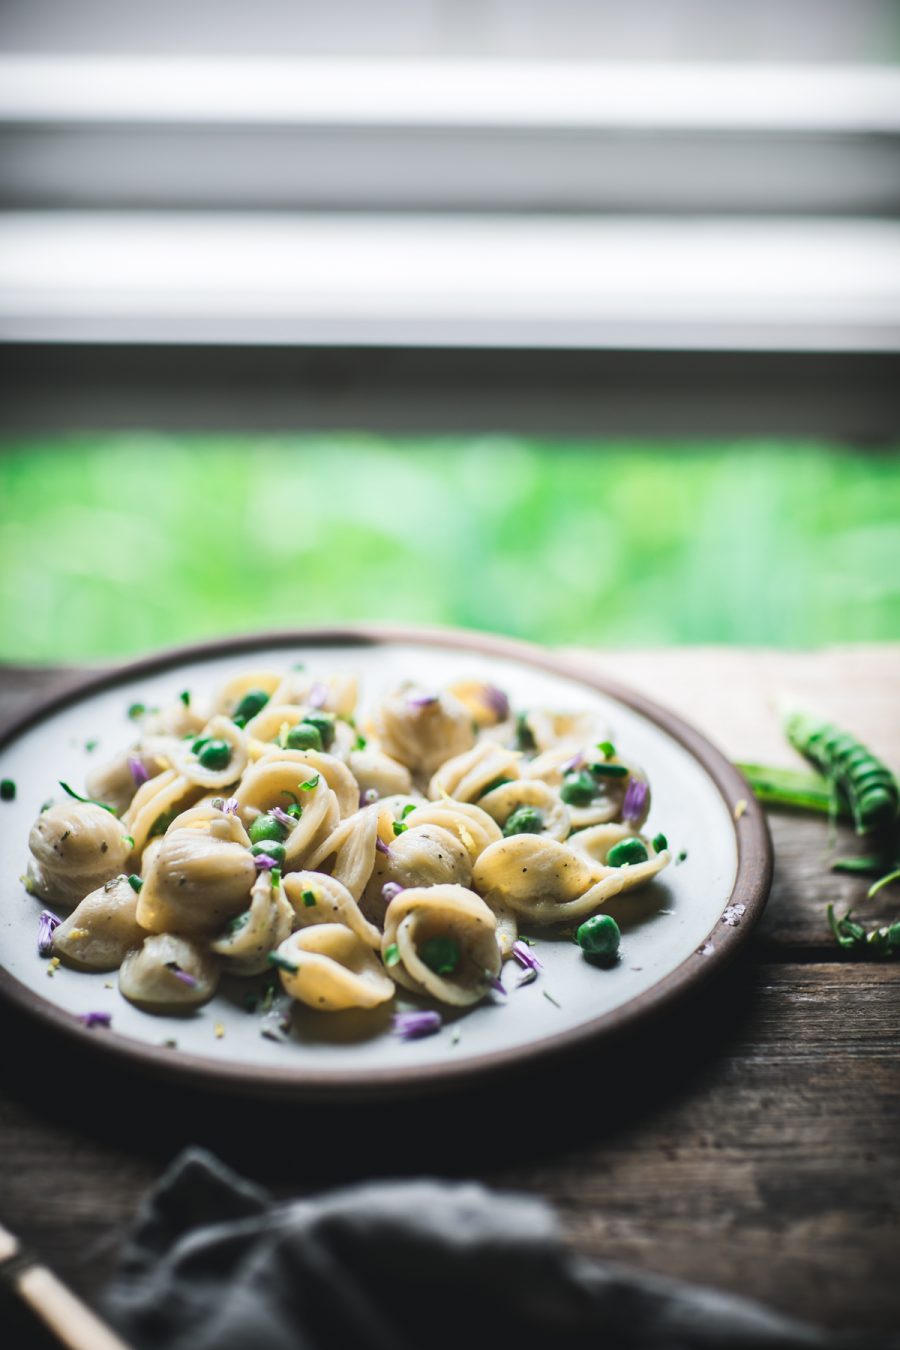 Chive and Chicken Orecchiette in a Rosemary Lemon Sauce